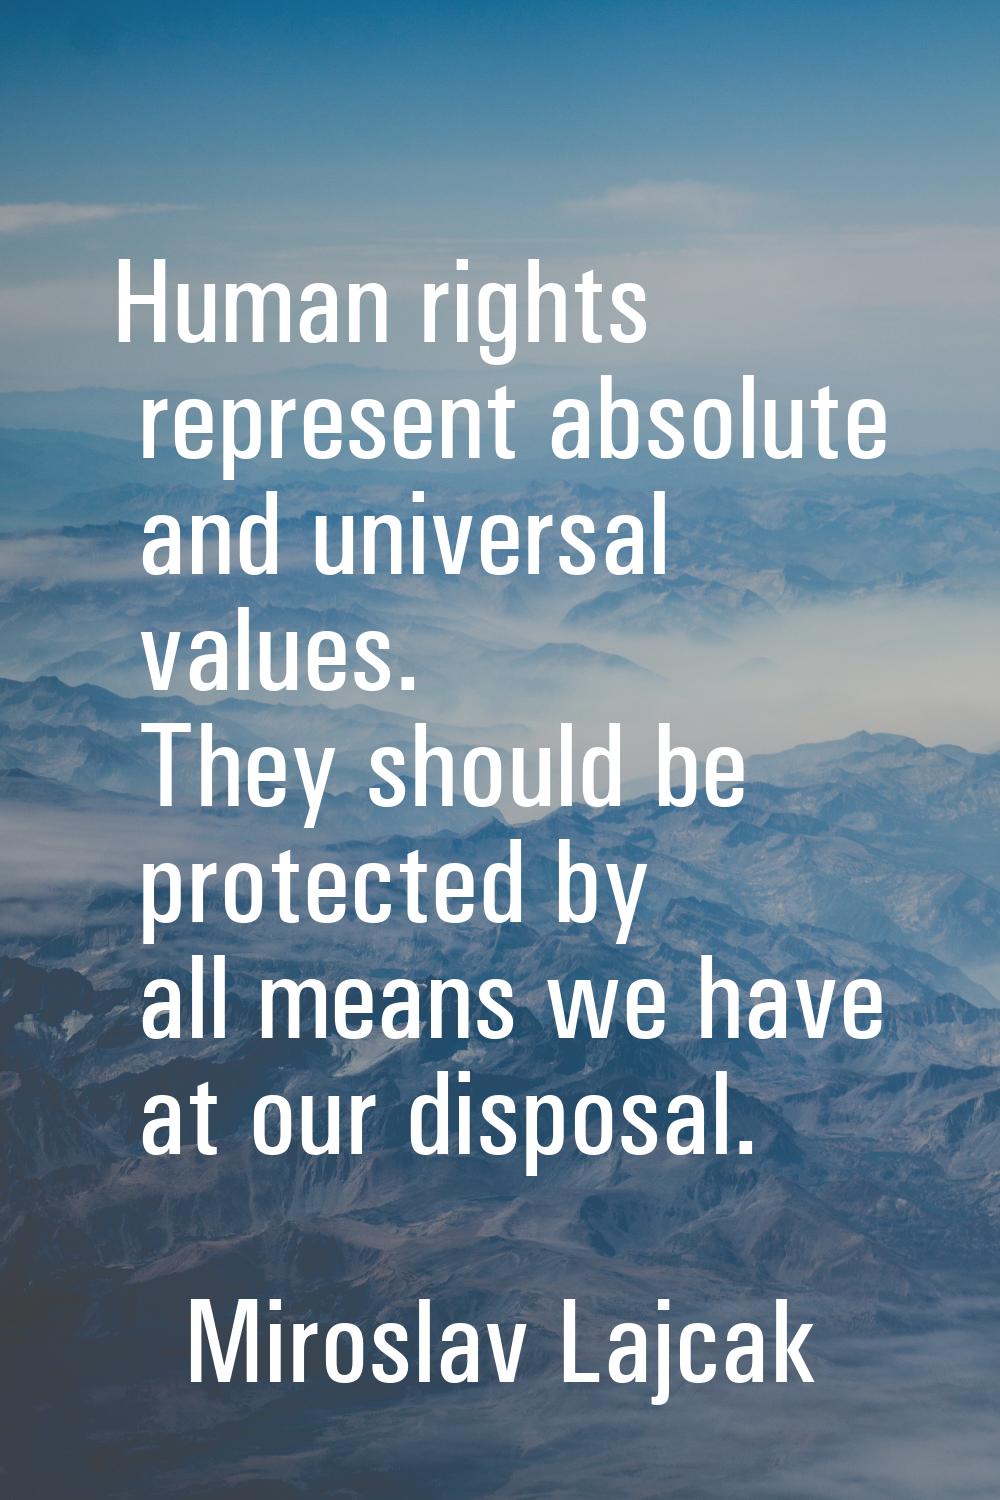 Human rights represent absolute and universal values. They should be protected by all means we have